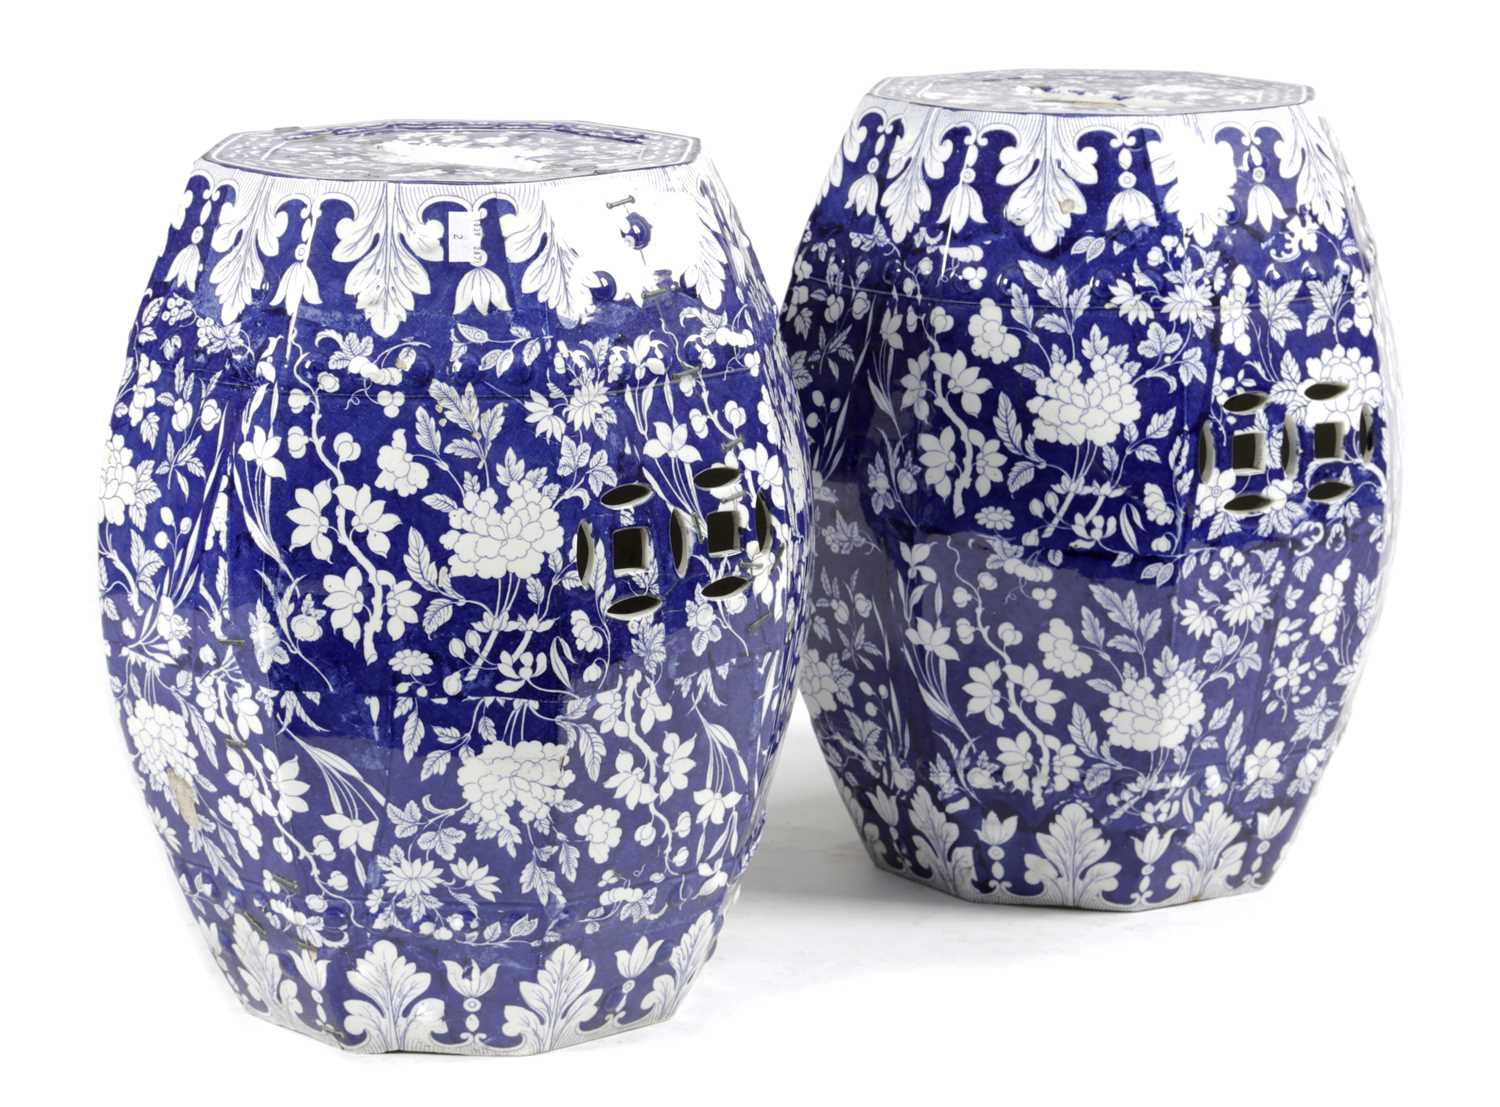 A PAIR OF ENGLISH POTTERY BLUE AND WHITE GARDEN SEATS IN CHINESE STYLE, 19TH CENTURY of octagonal